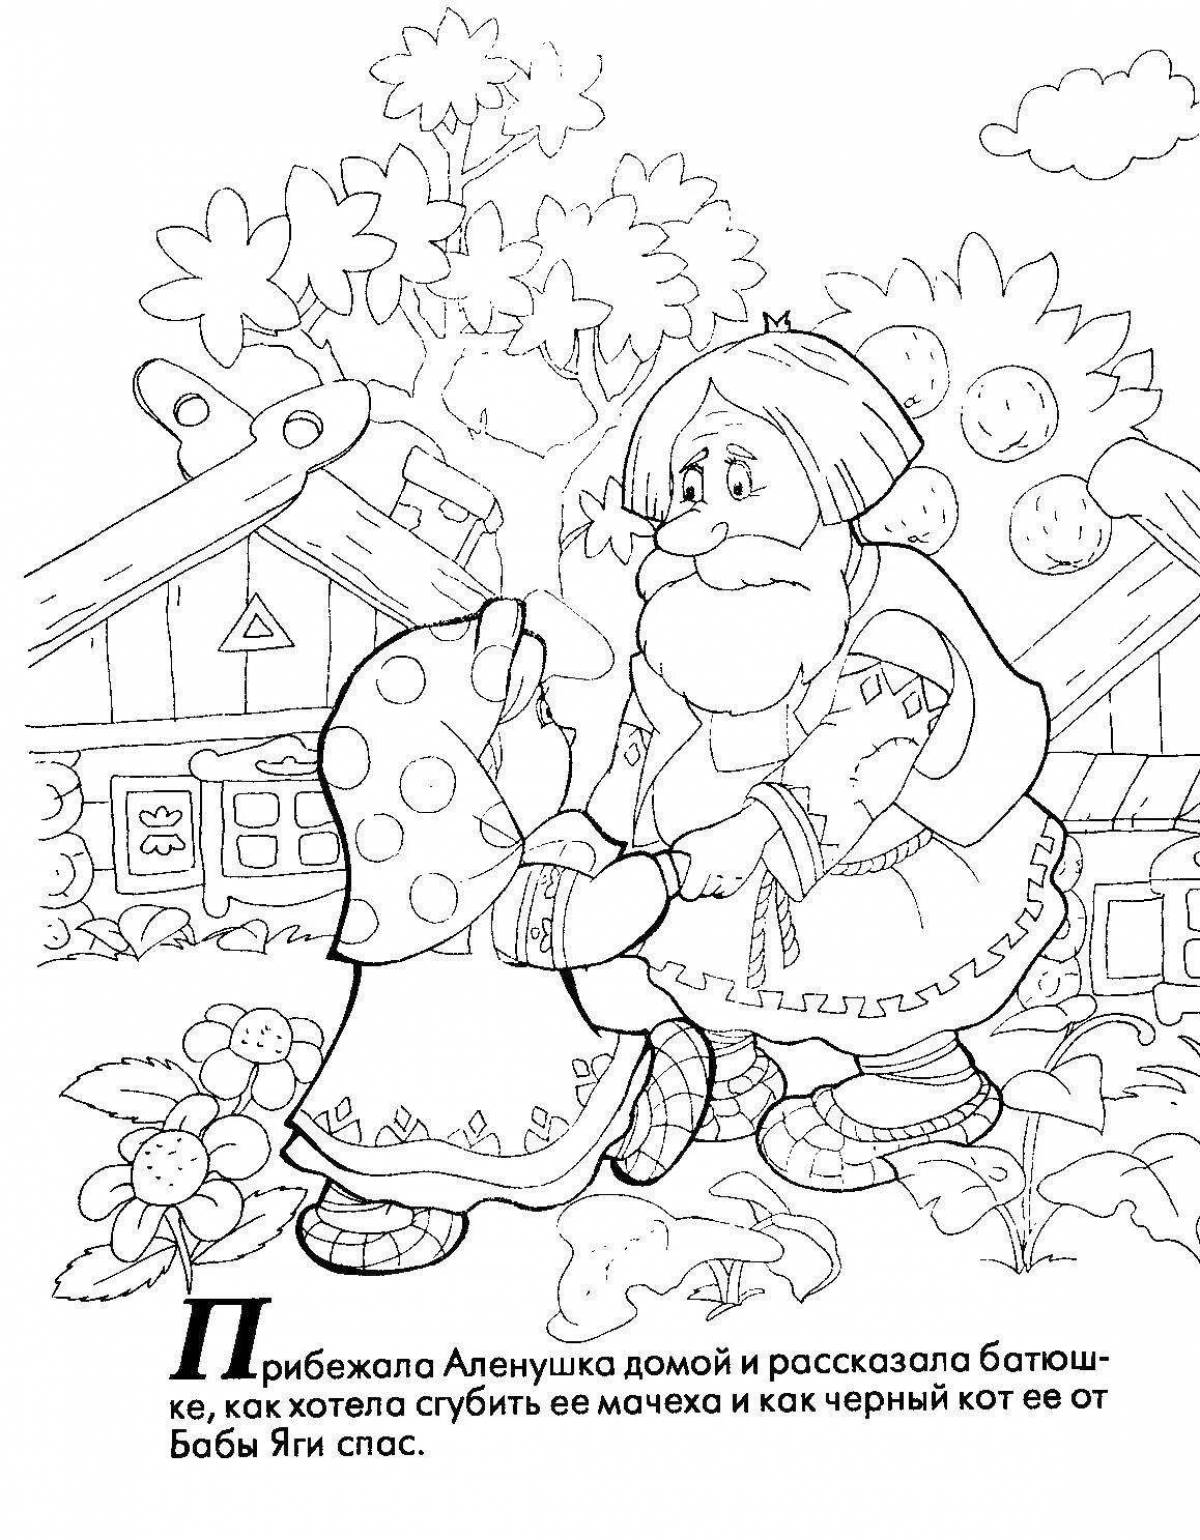 Snow Maiden funny coloring book